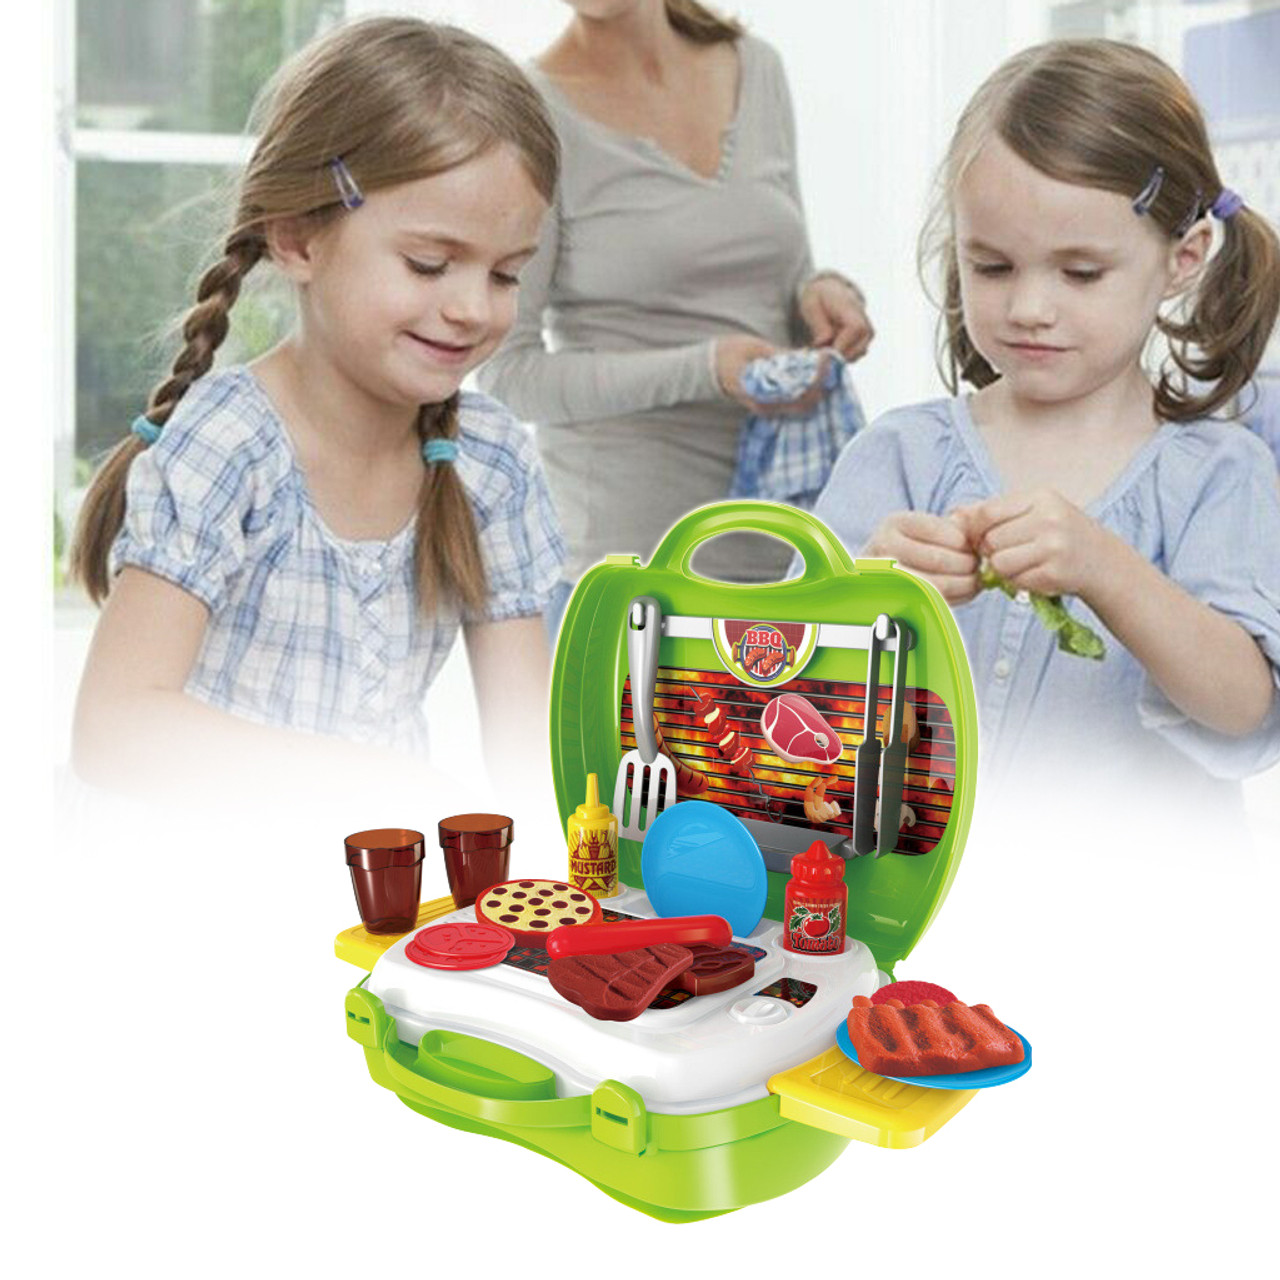 Kitchen Set Toys BBQ Grill For Kid Pretend Play Toddler Children Food Cooking 